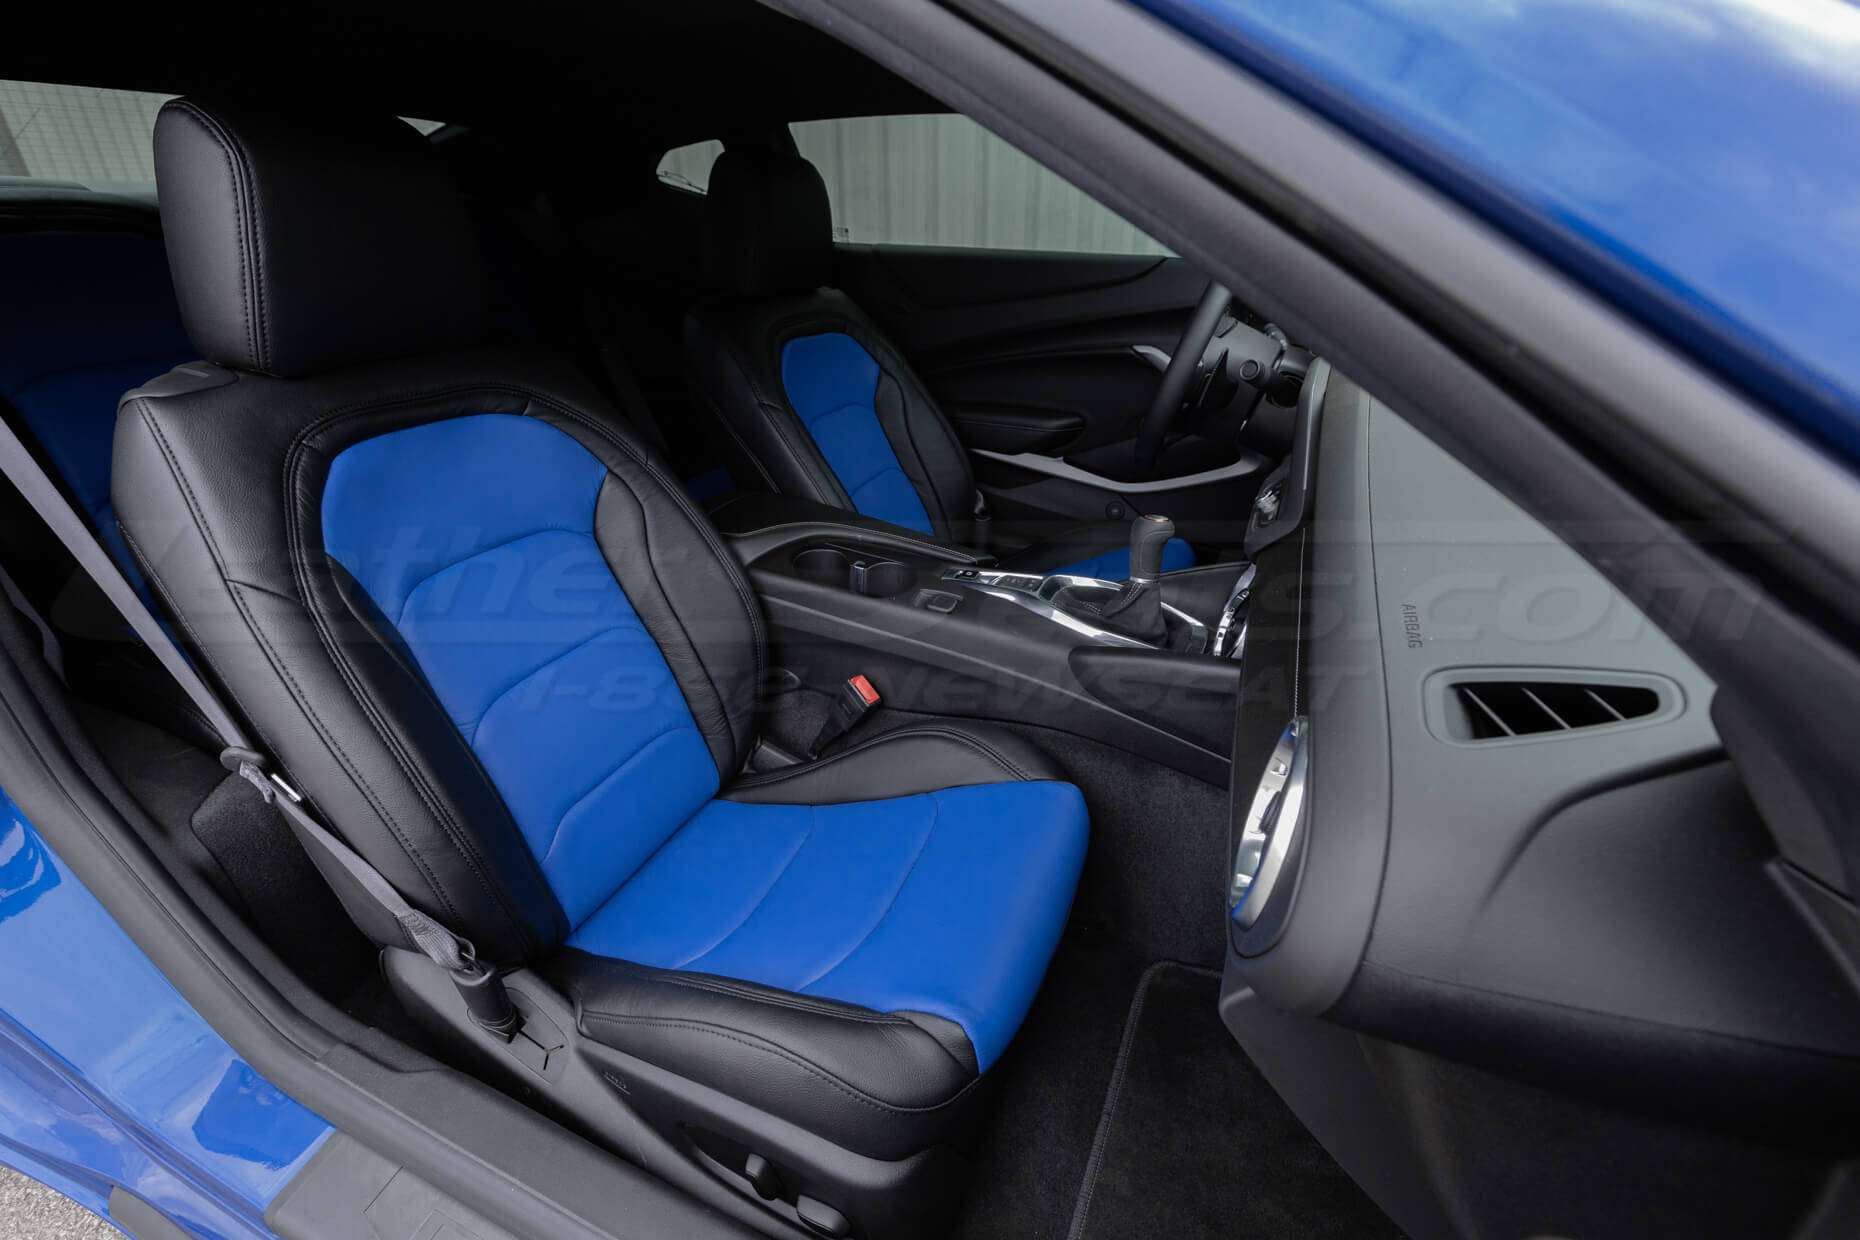 Chevy Camaro Black & Cobalt Leather seats from front passenger side